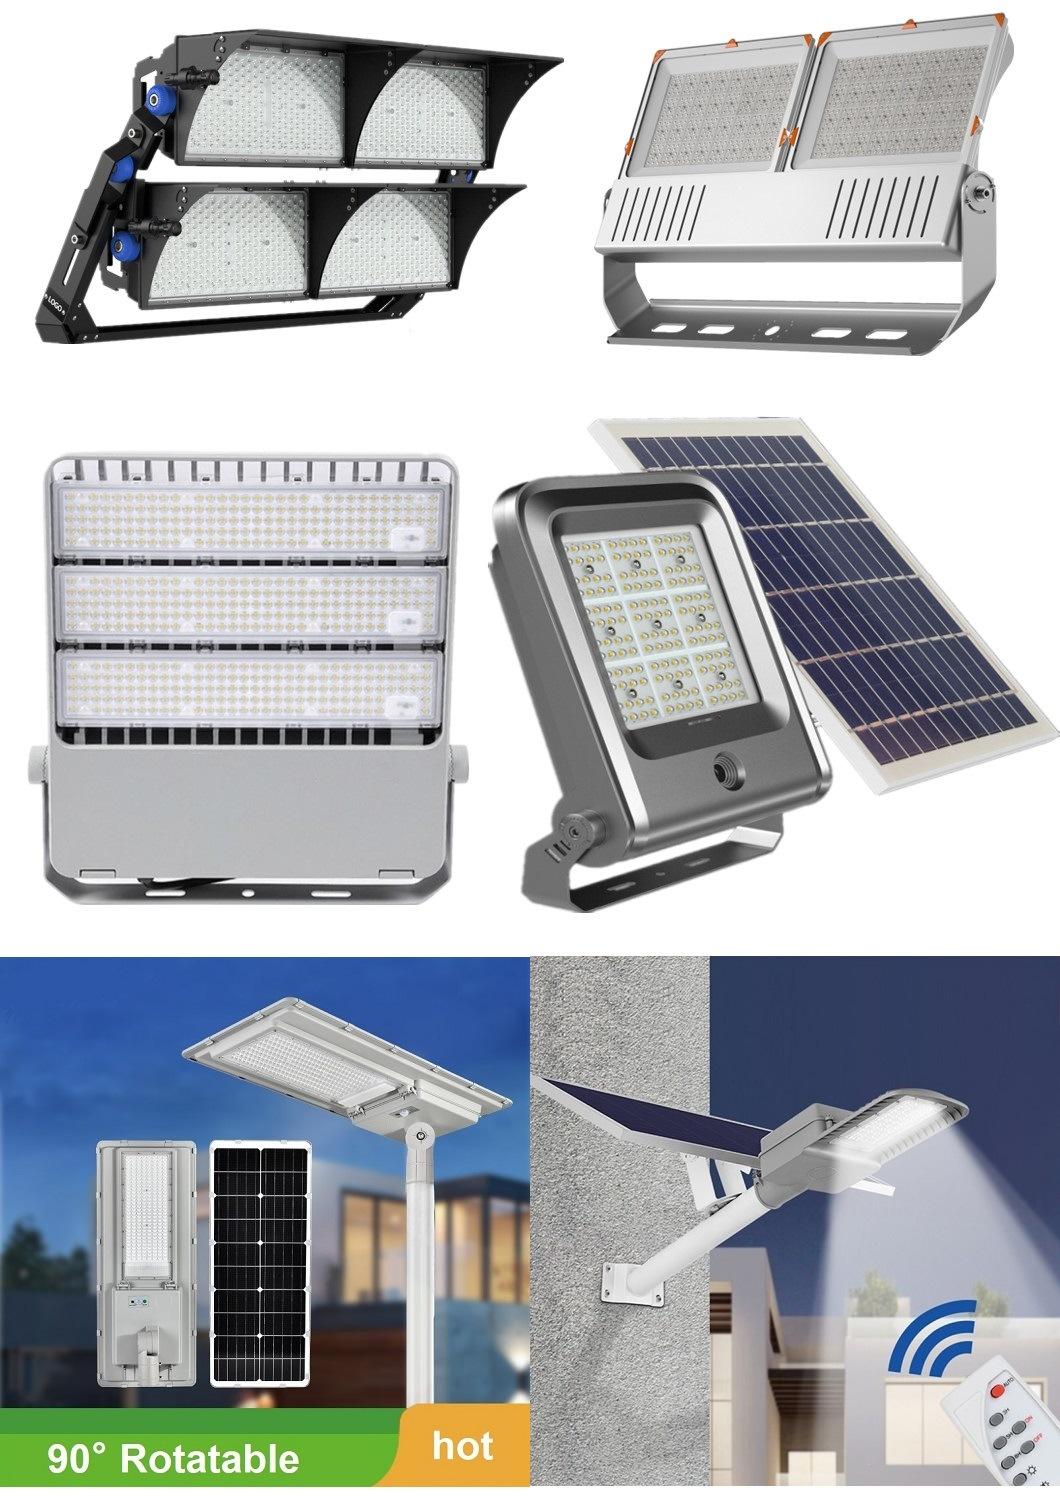 Solar Powered LED Outdoor Lighting Automatically Turn on at Night